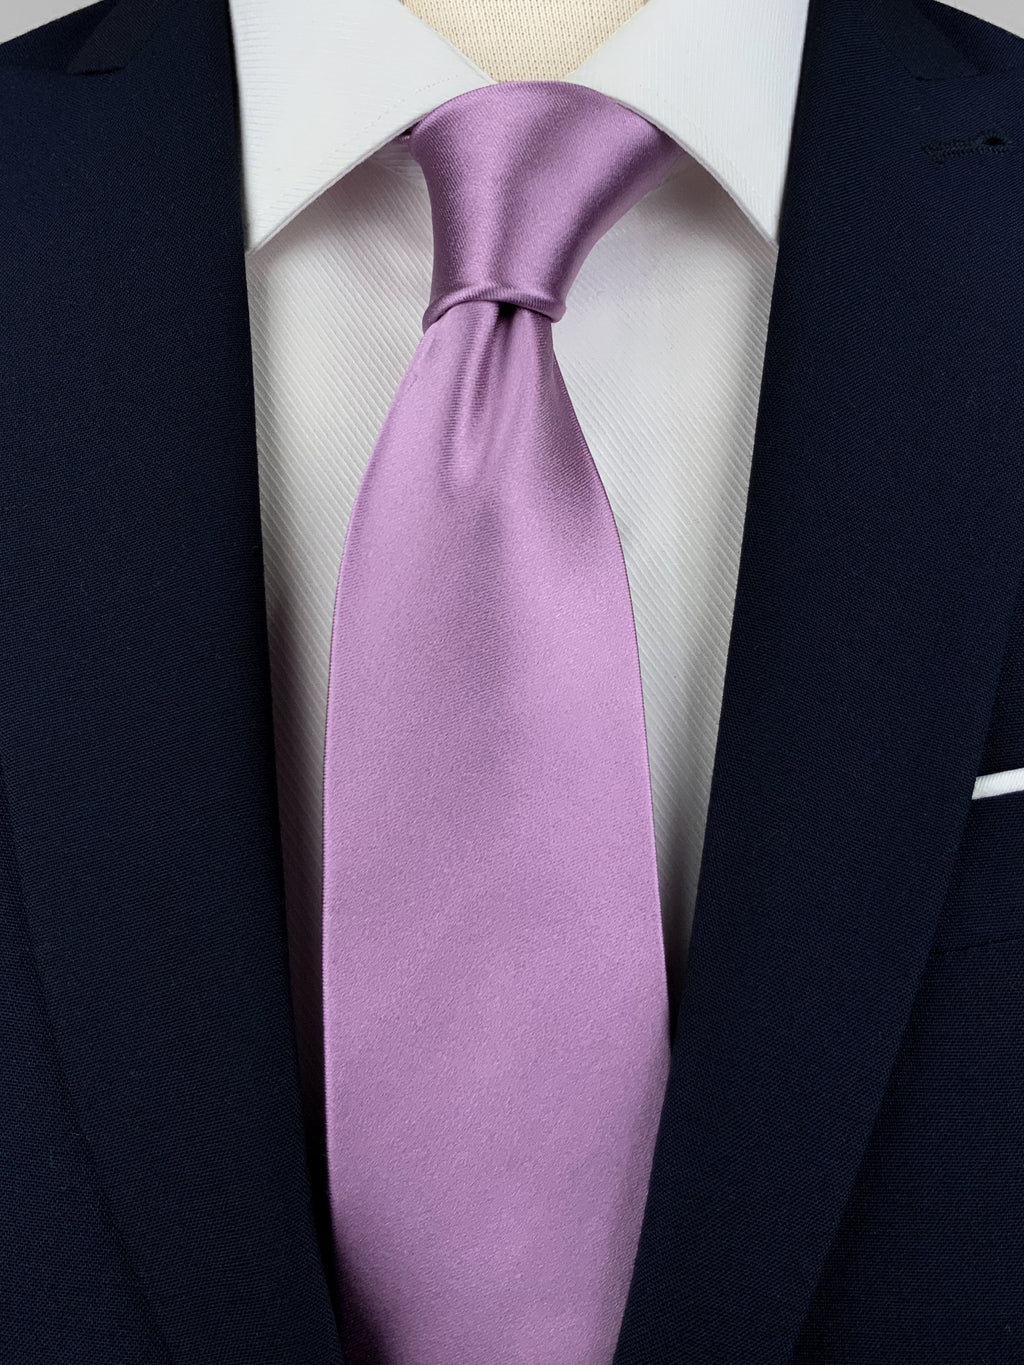 Lilac mulberry silk satin tie worn with a white shirt and a navy blue suit